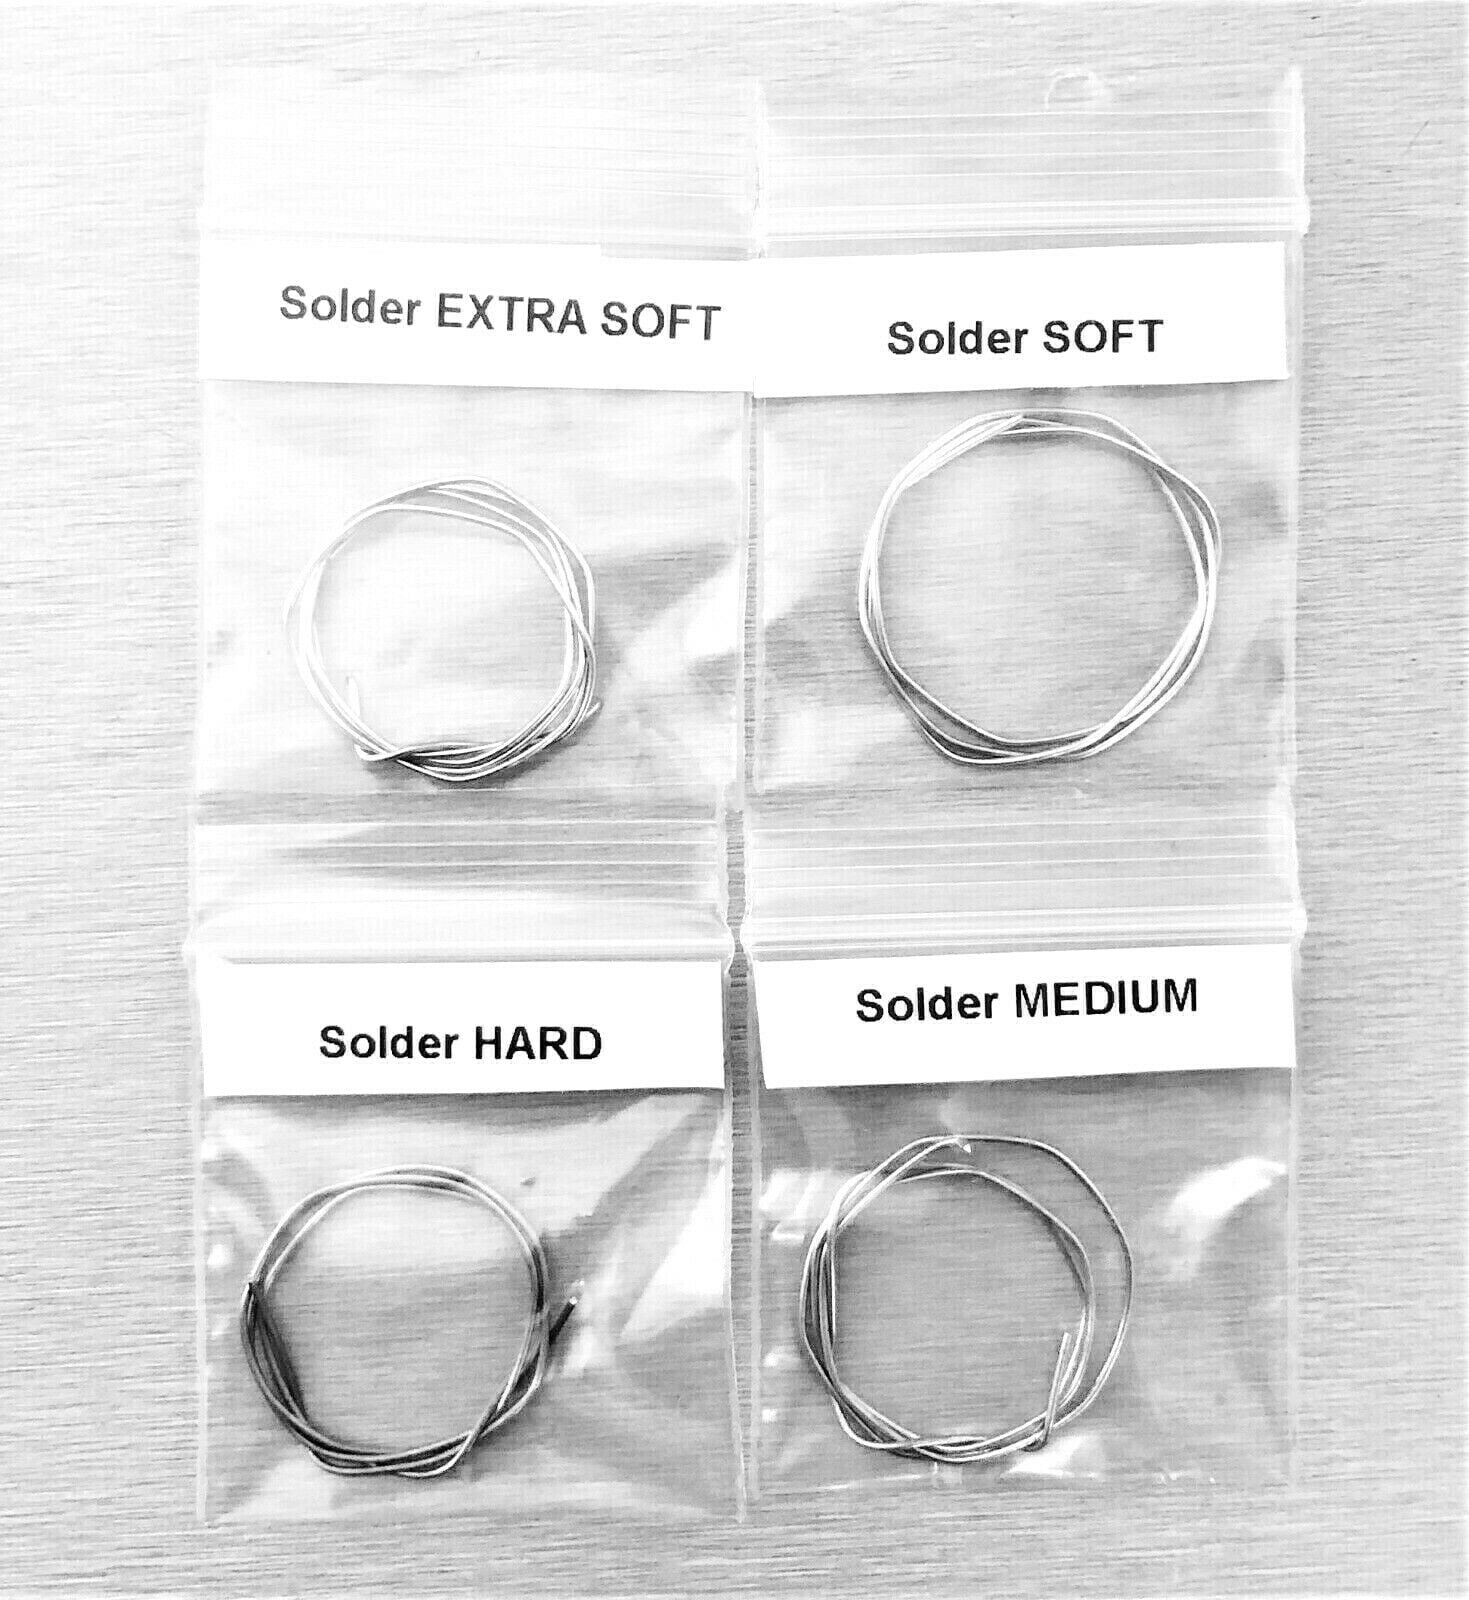 JTS Jewelry Silver Solder Wire Assorted 4 Types Easy Soft, Soft, Medium Hard Soldering Made in USA